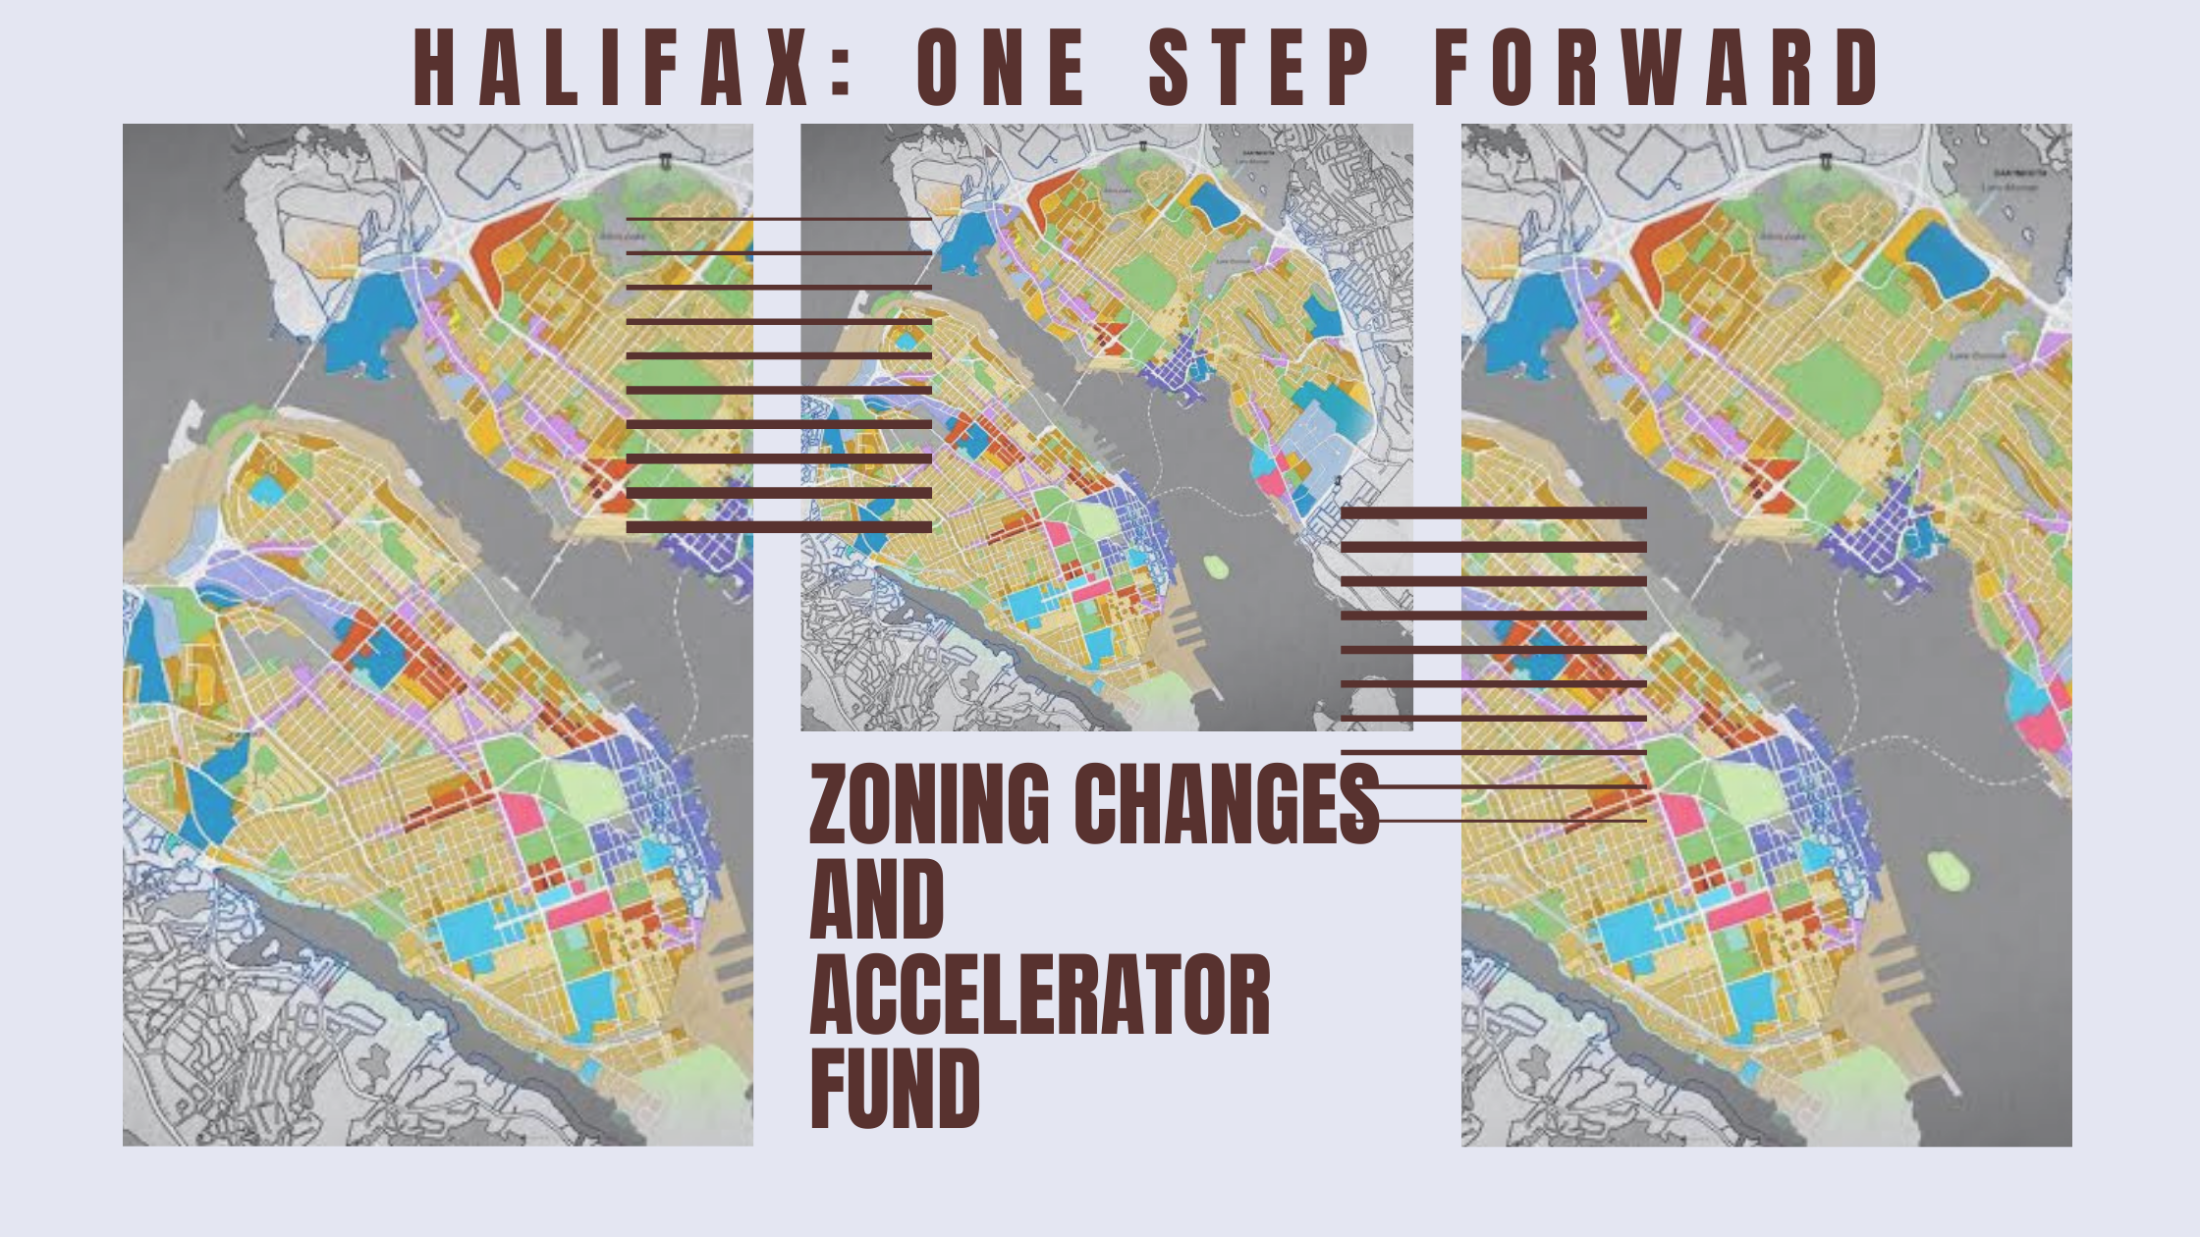 Halifax Zoning Changes and Accelerator Fund: Transforming Housing Development and Urban Growth